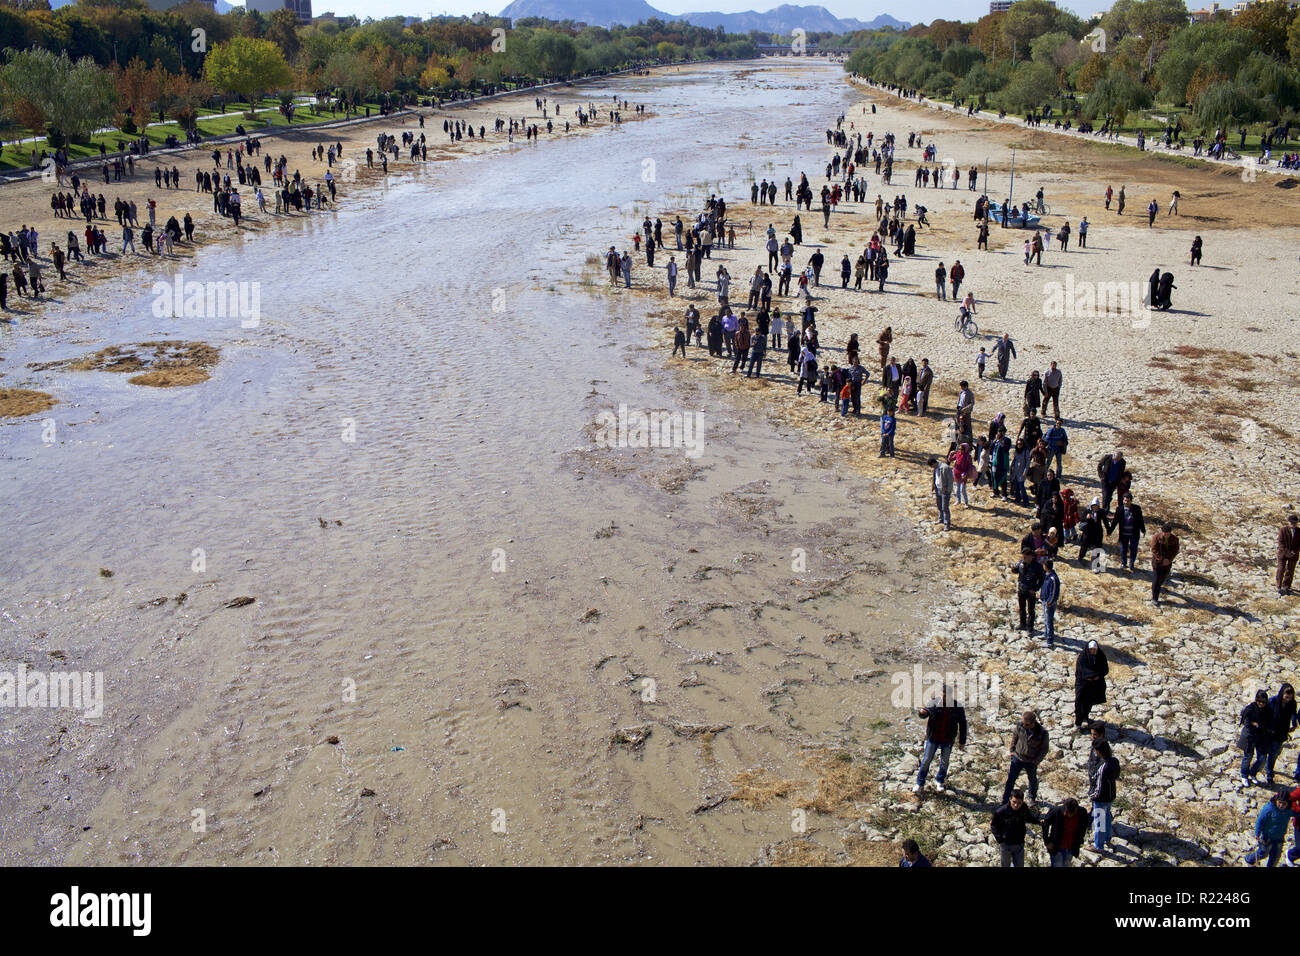 Iran: Isfahan 2011/11/07. People desperate for water, near the Allahverdi Khan Bridge (popularly known as Si-o-se-pol), across the Zayanderud river. C Stock Photo